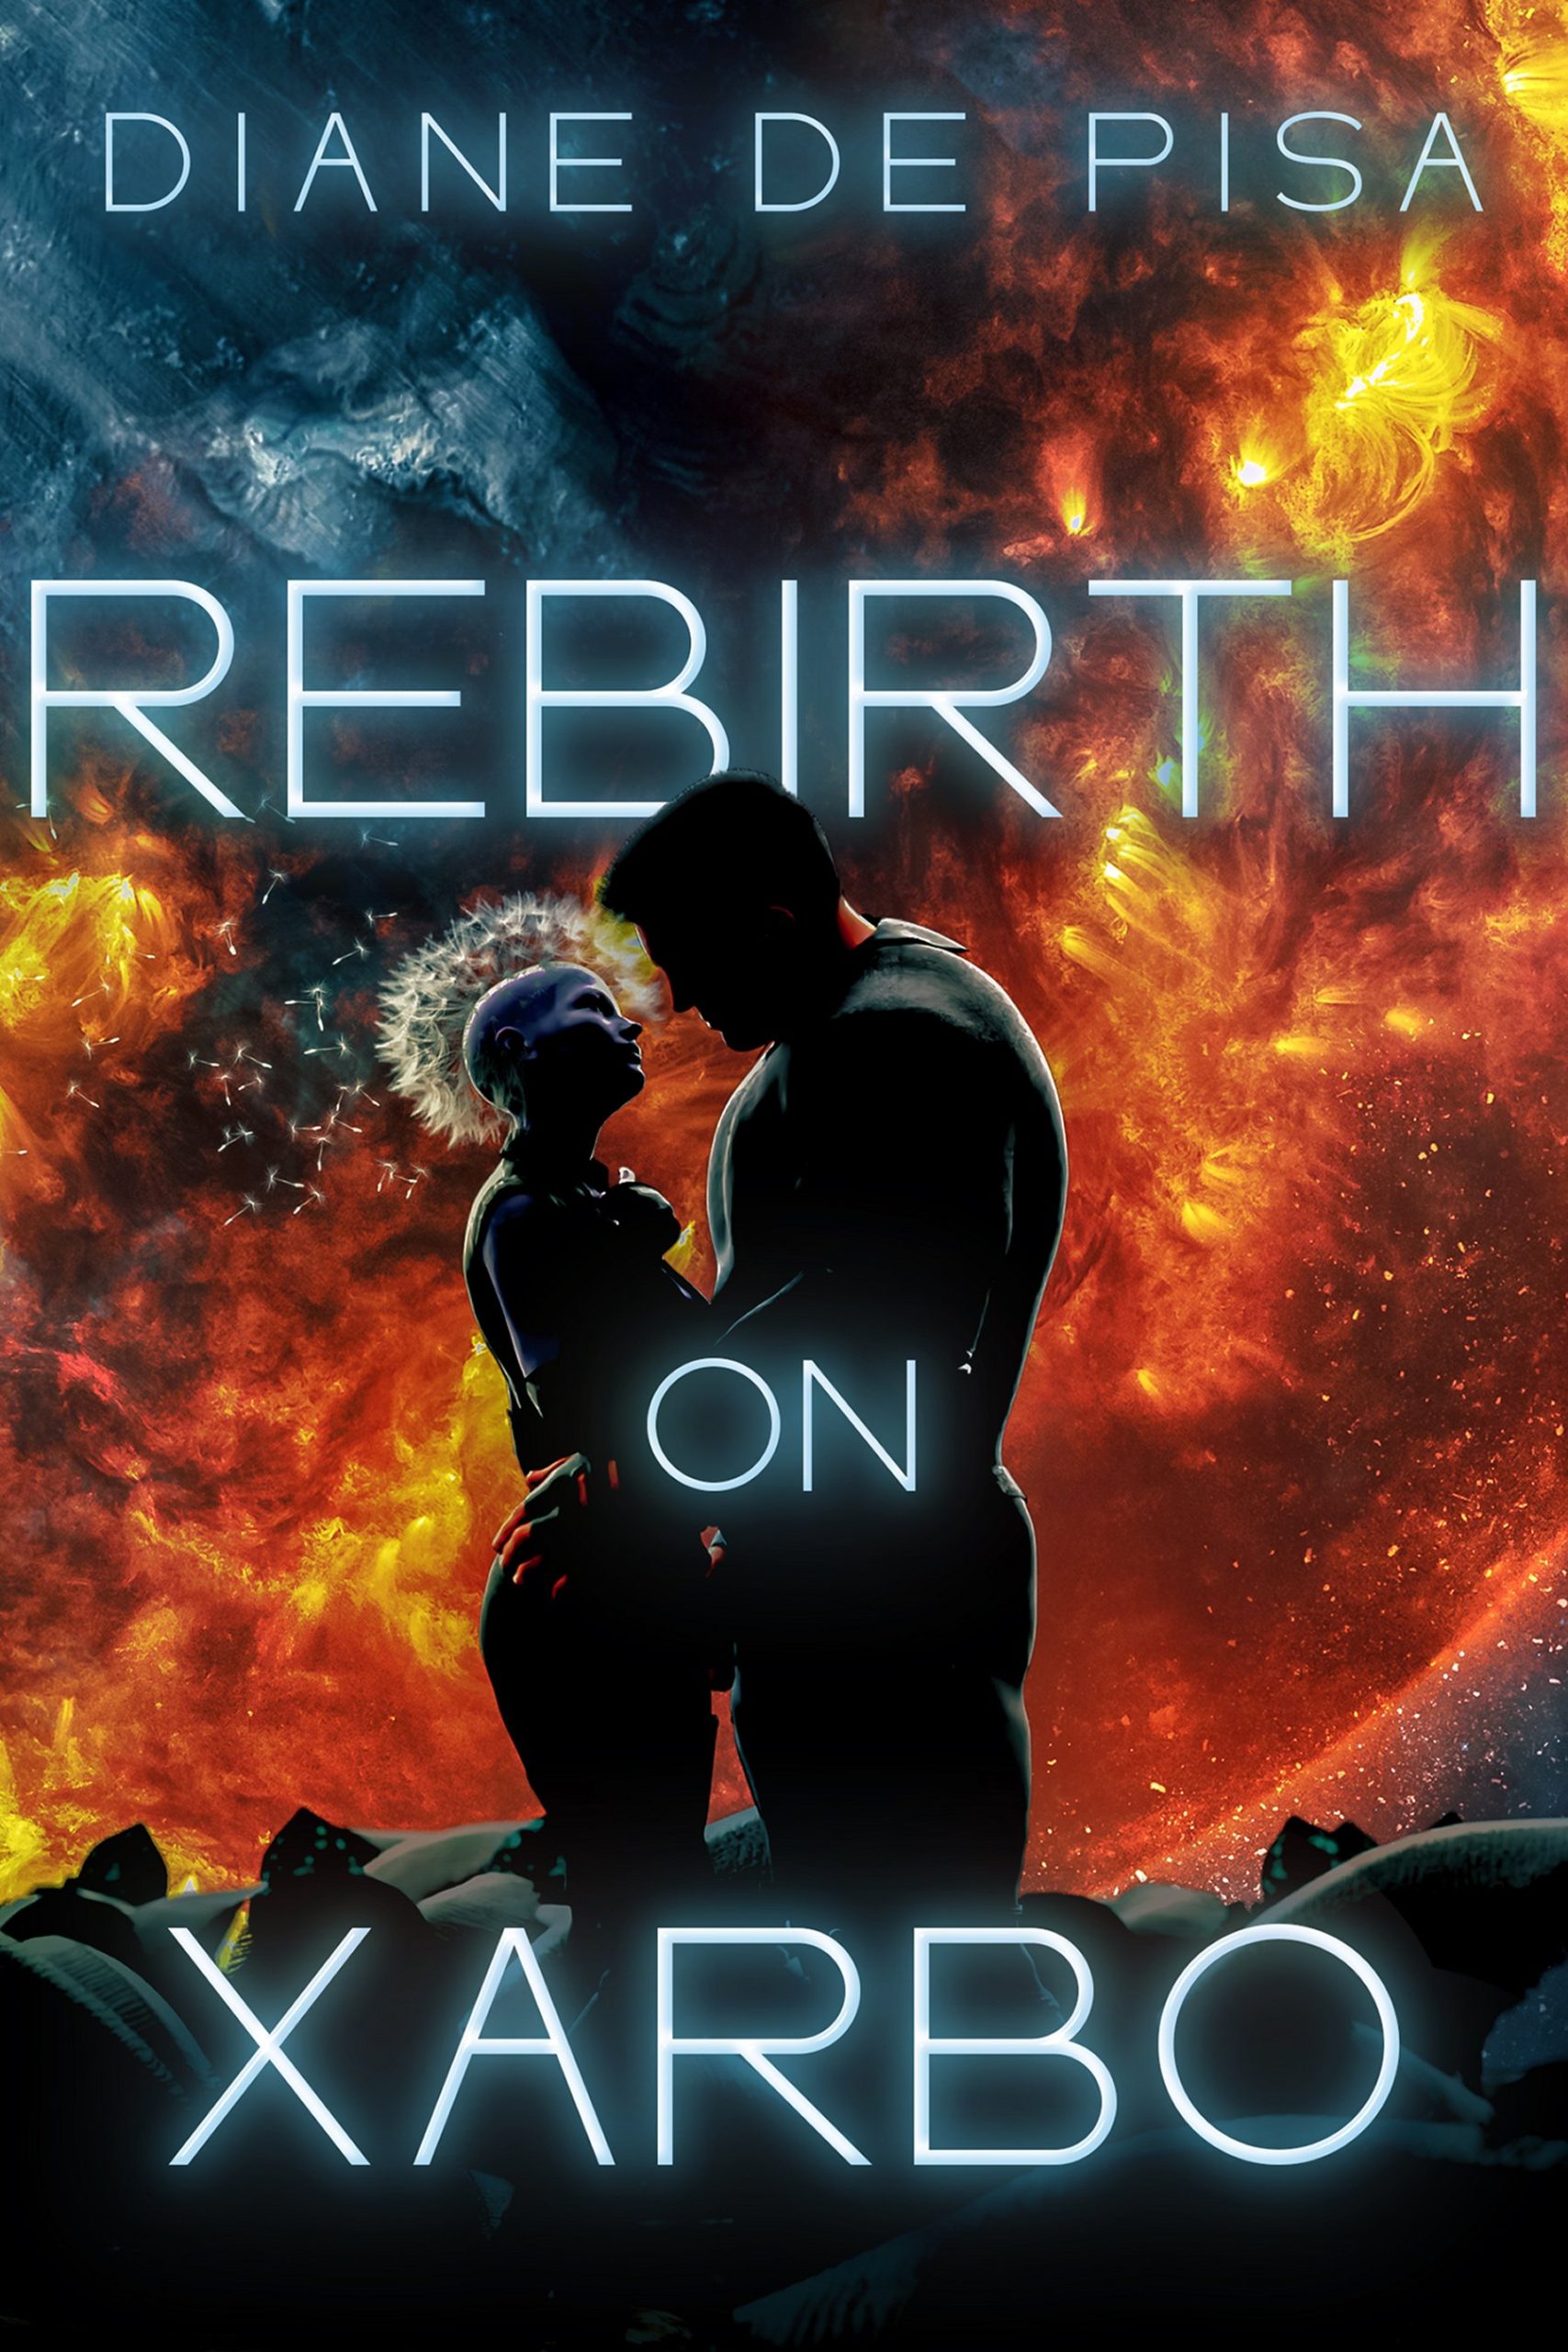 Rebirth on Xarbo (front cover)